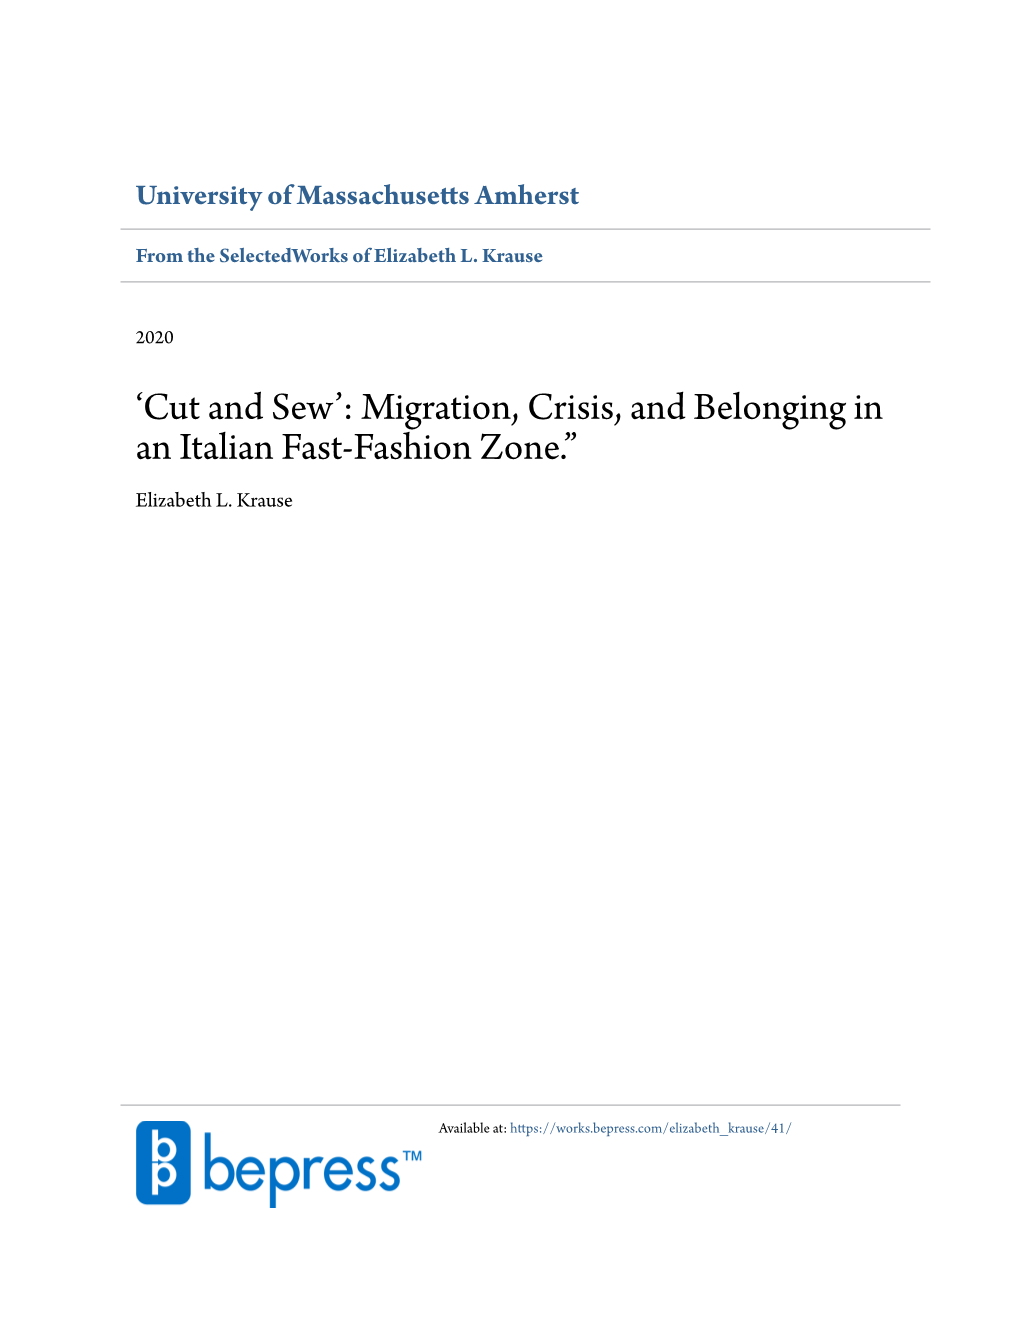 'Cut and Sew': Migration, Crisis, and Belonging In